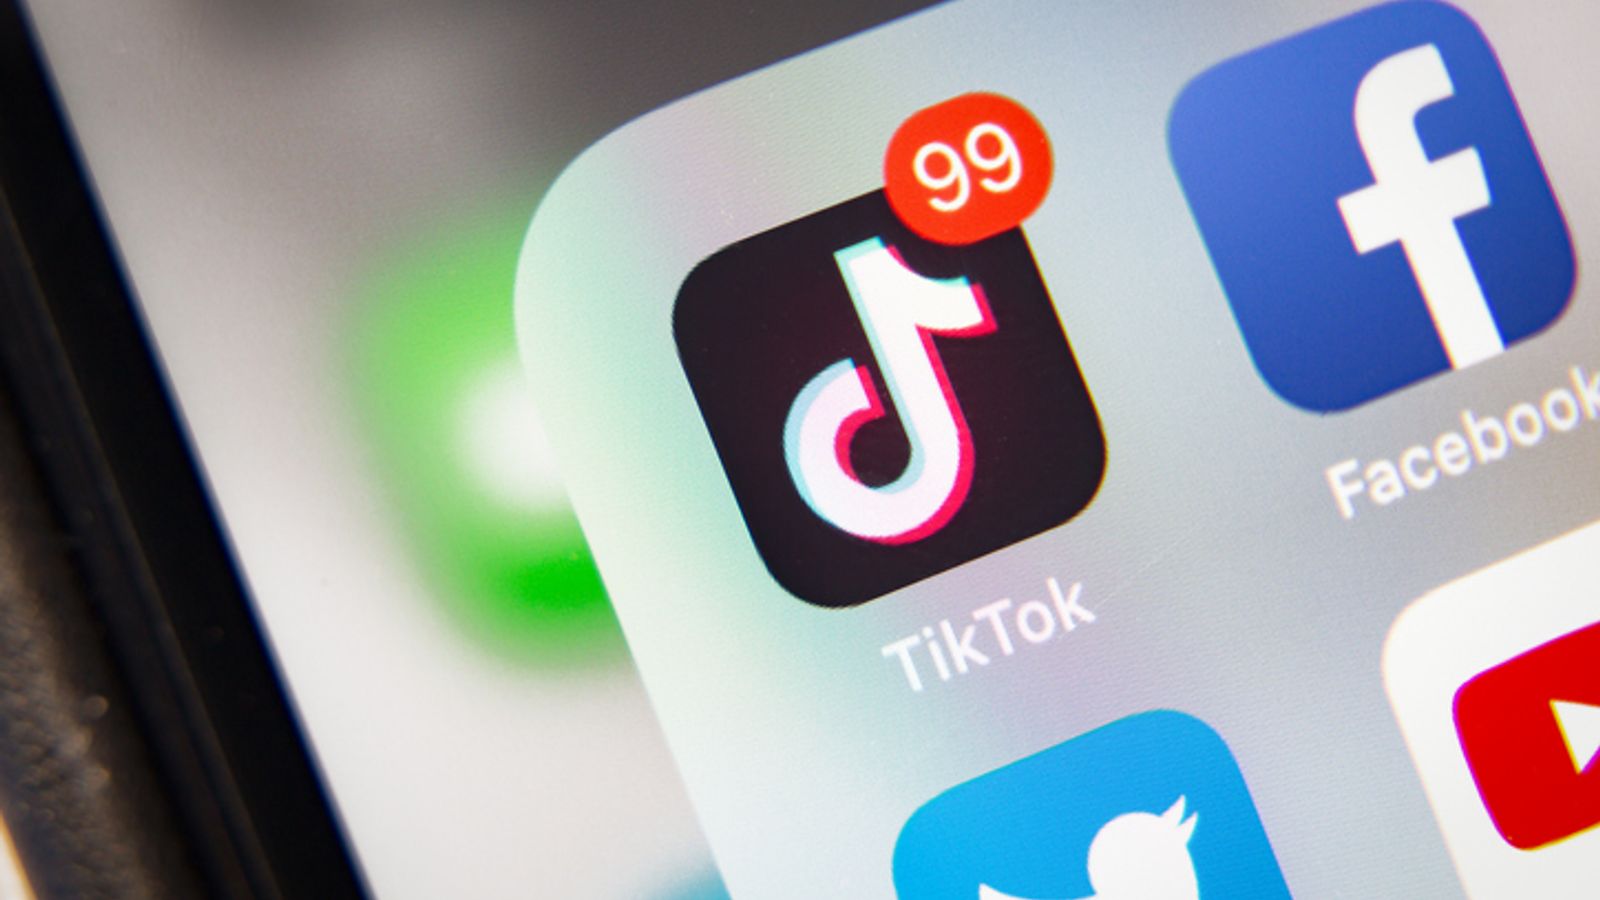 TikTok influencer with Tourette's Glen Cooney says scientists shouldn't exclude their voices after report on rise in tic symptoms